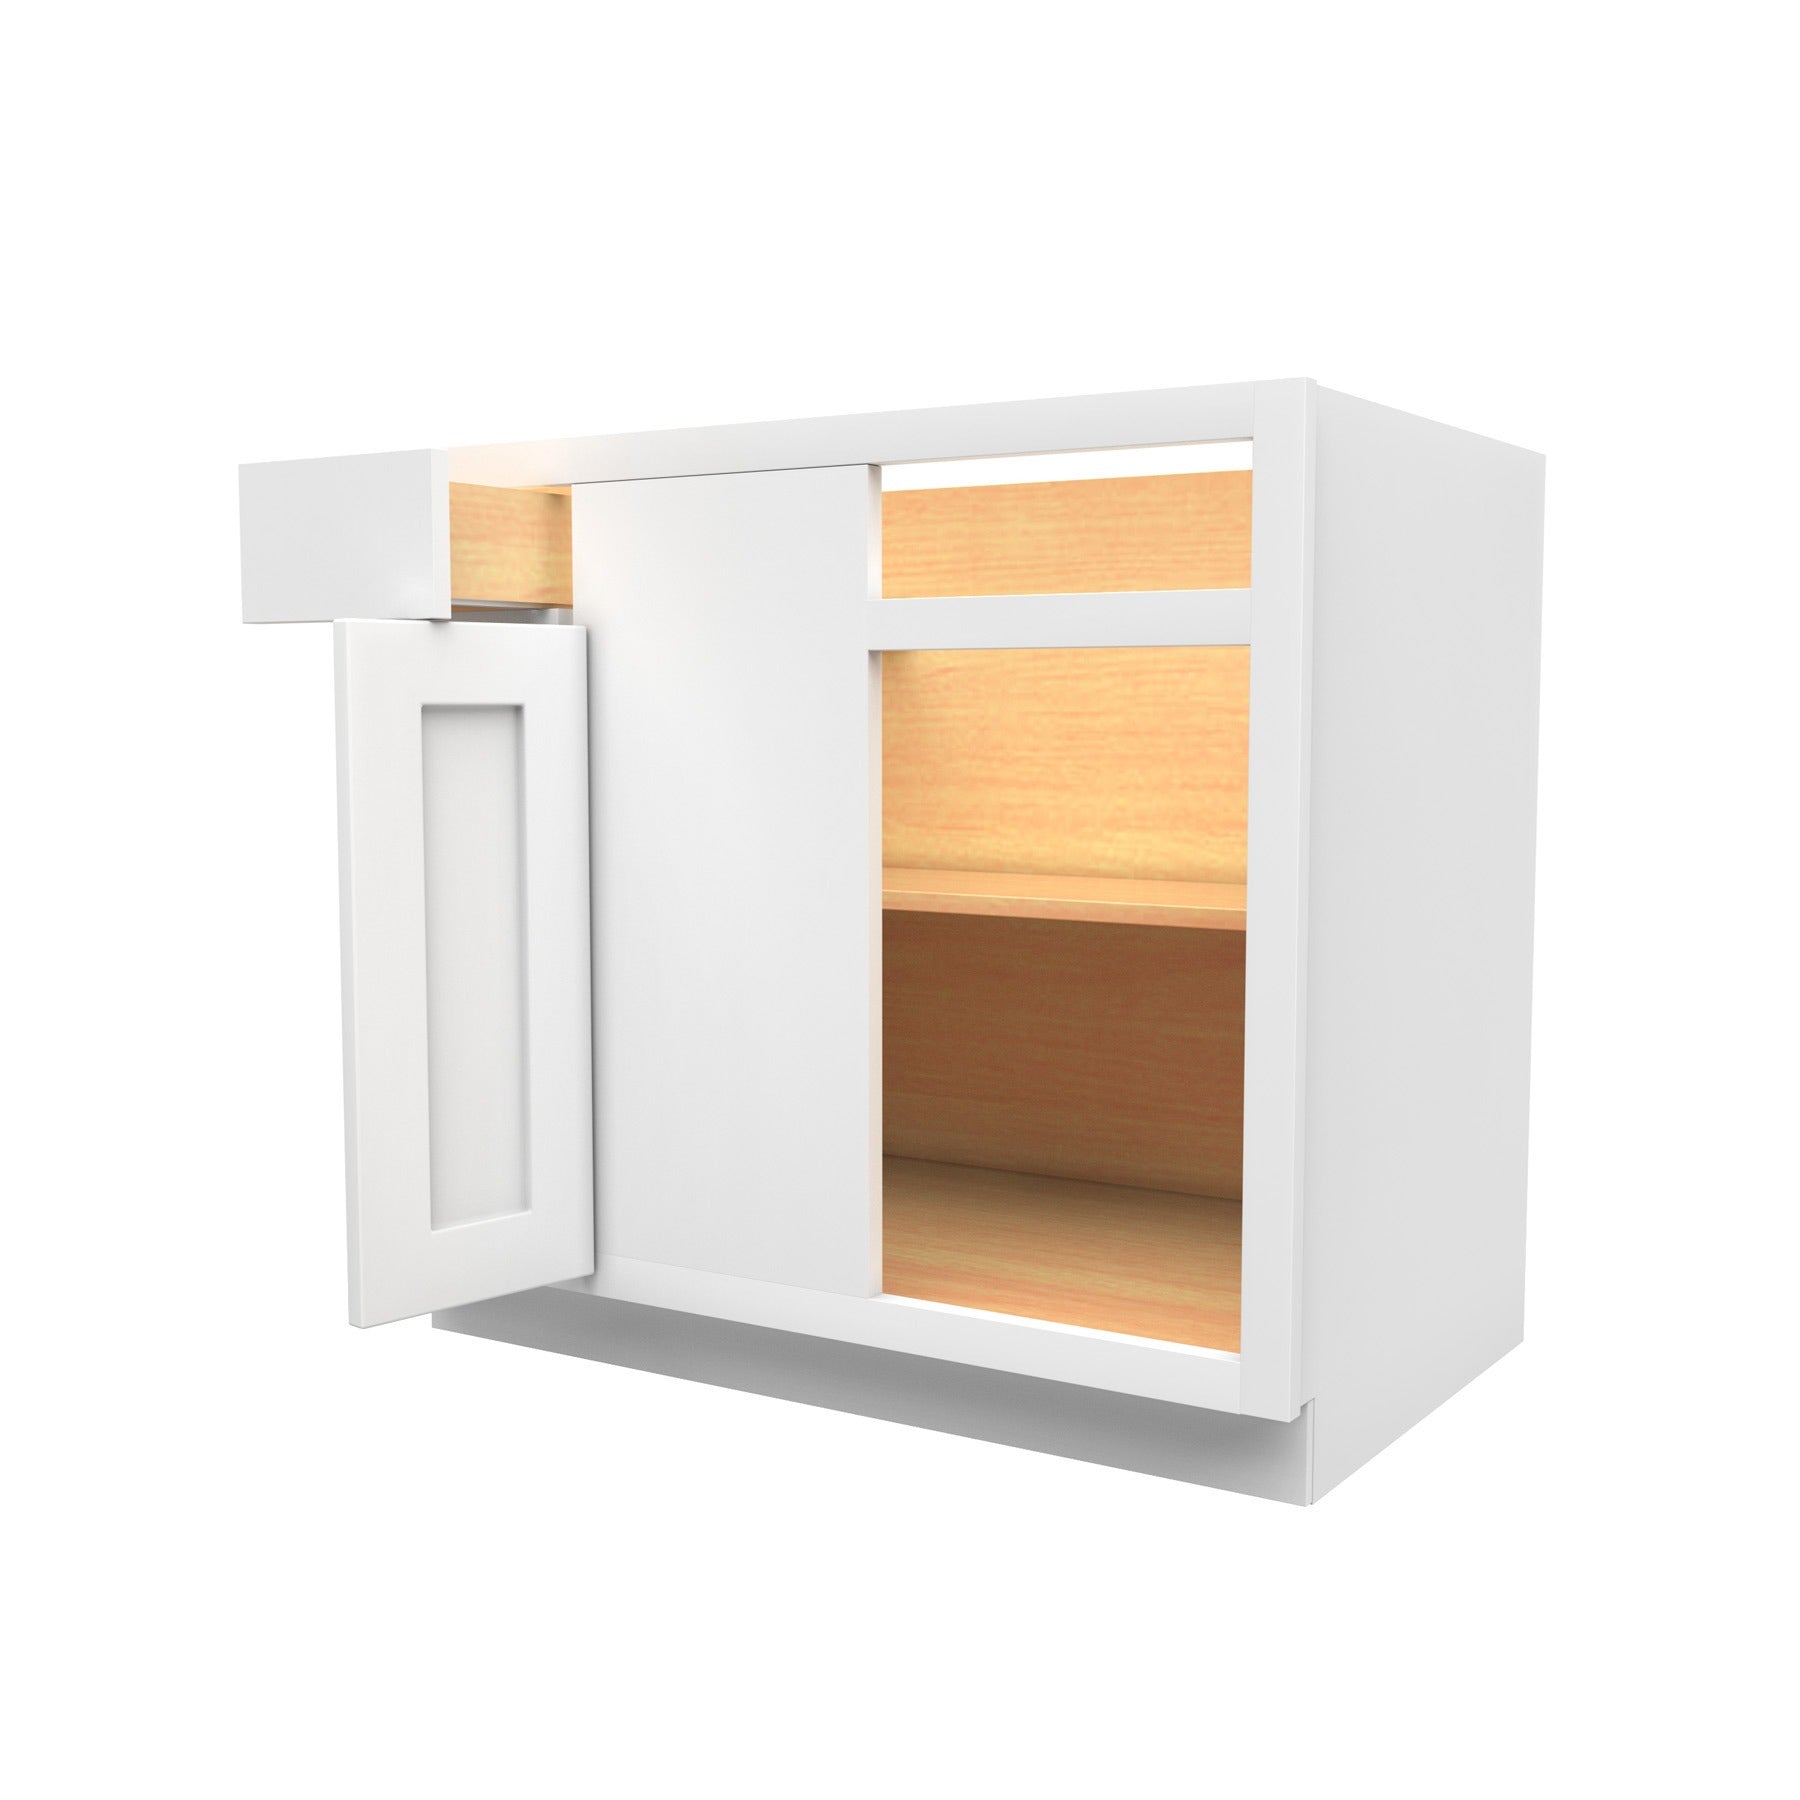 27 Inch Wide Accessible ADA - Blind Base Cabinet - Luxor White Shaker - Ready To Assemble, 27"W x 32.5"H x 24"D